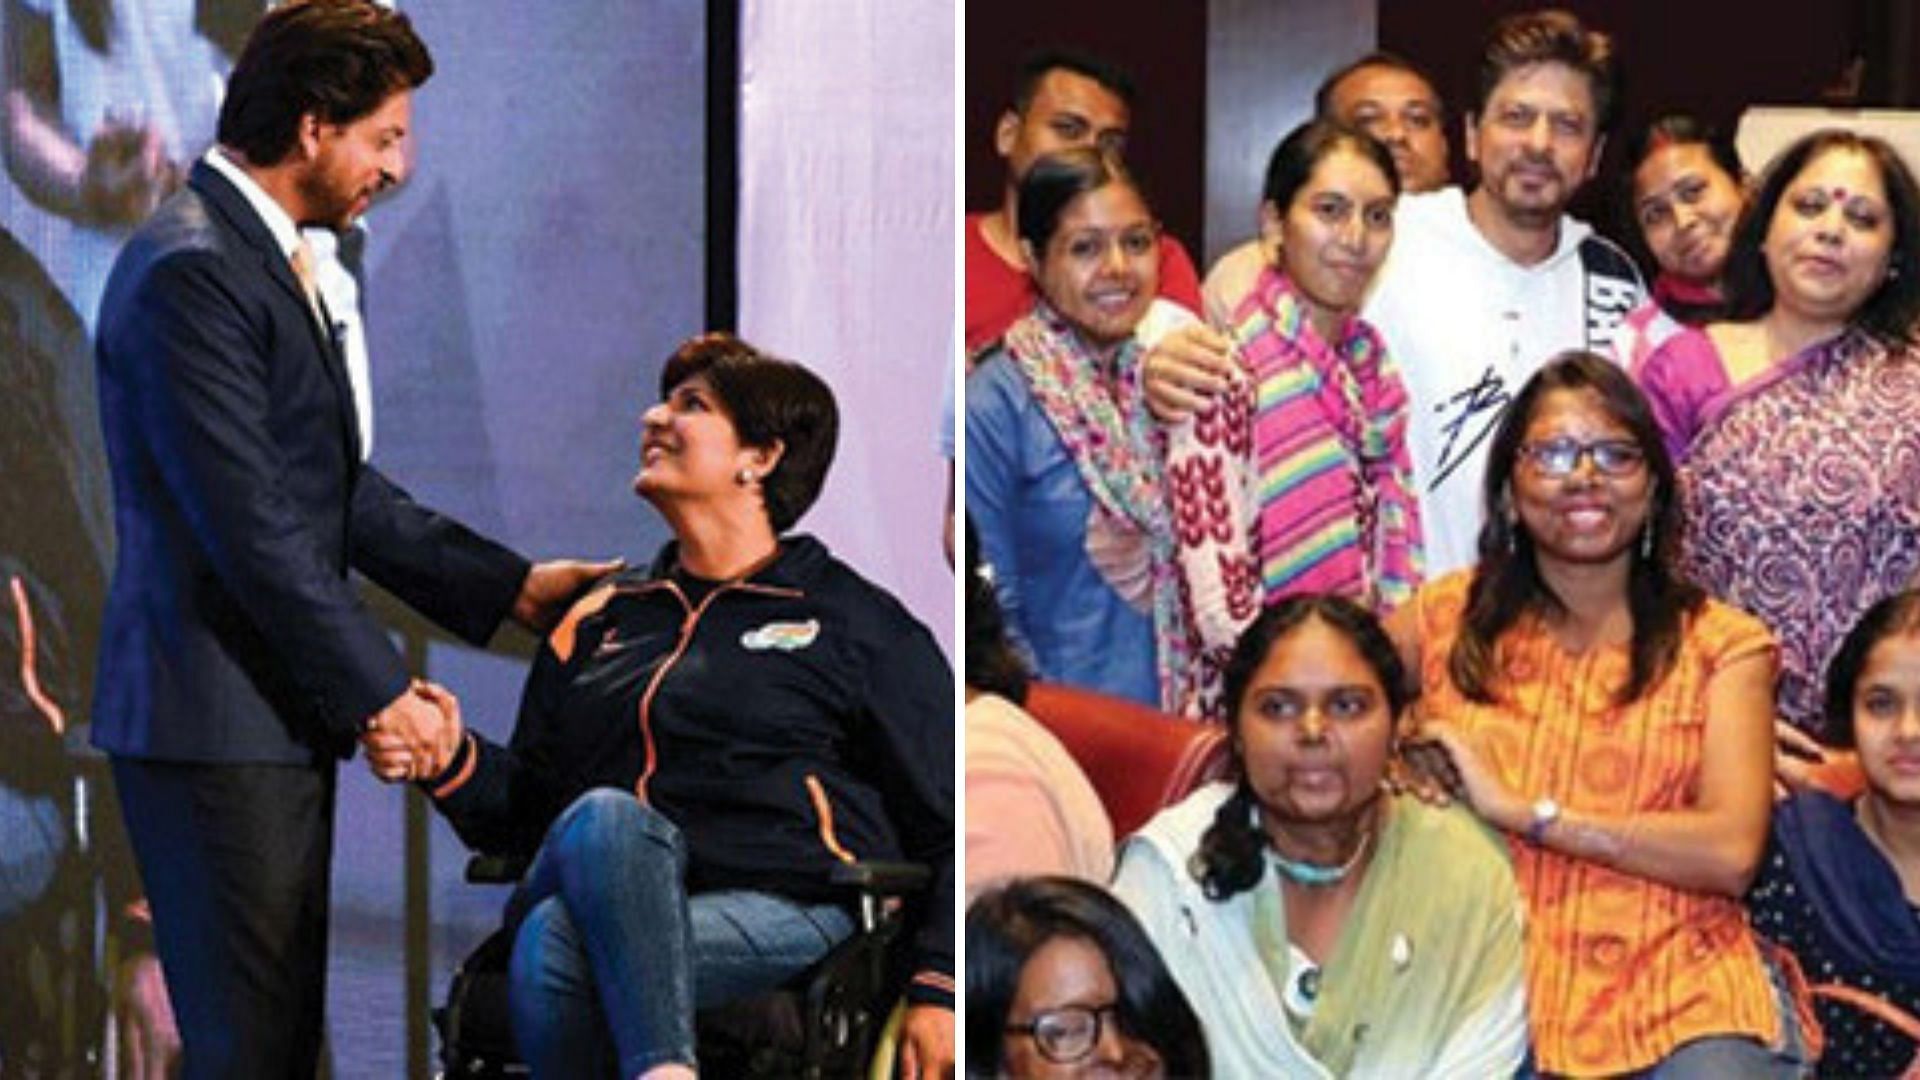 Shah Rukh Khan launched the Meer Foundation on Father’s Day